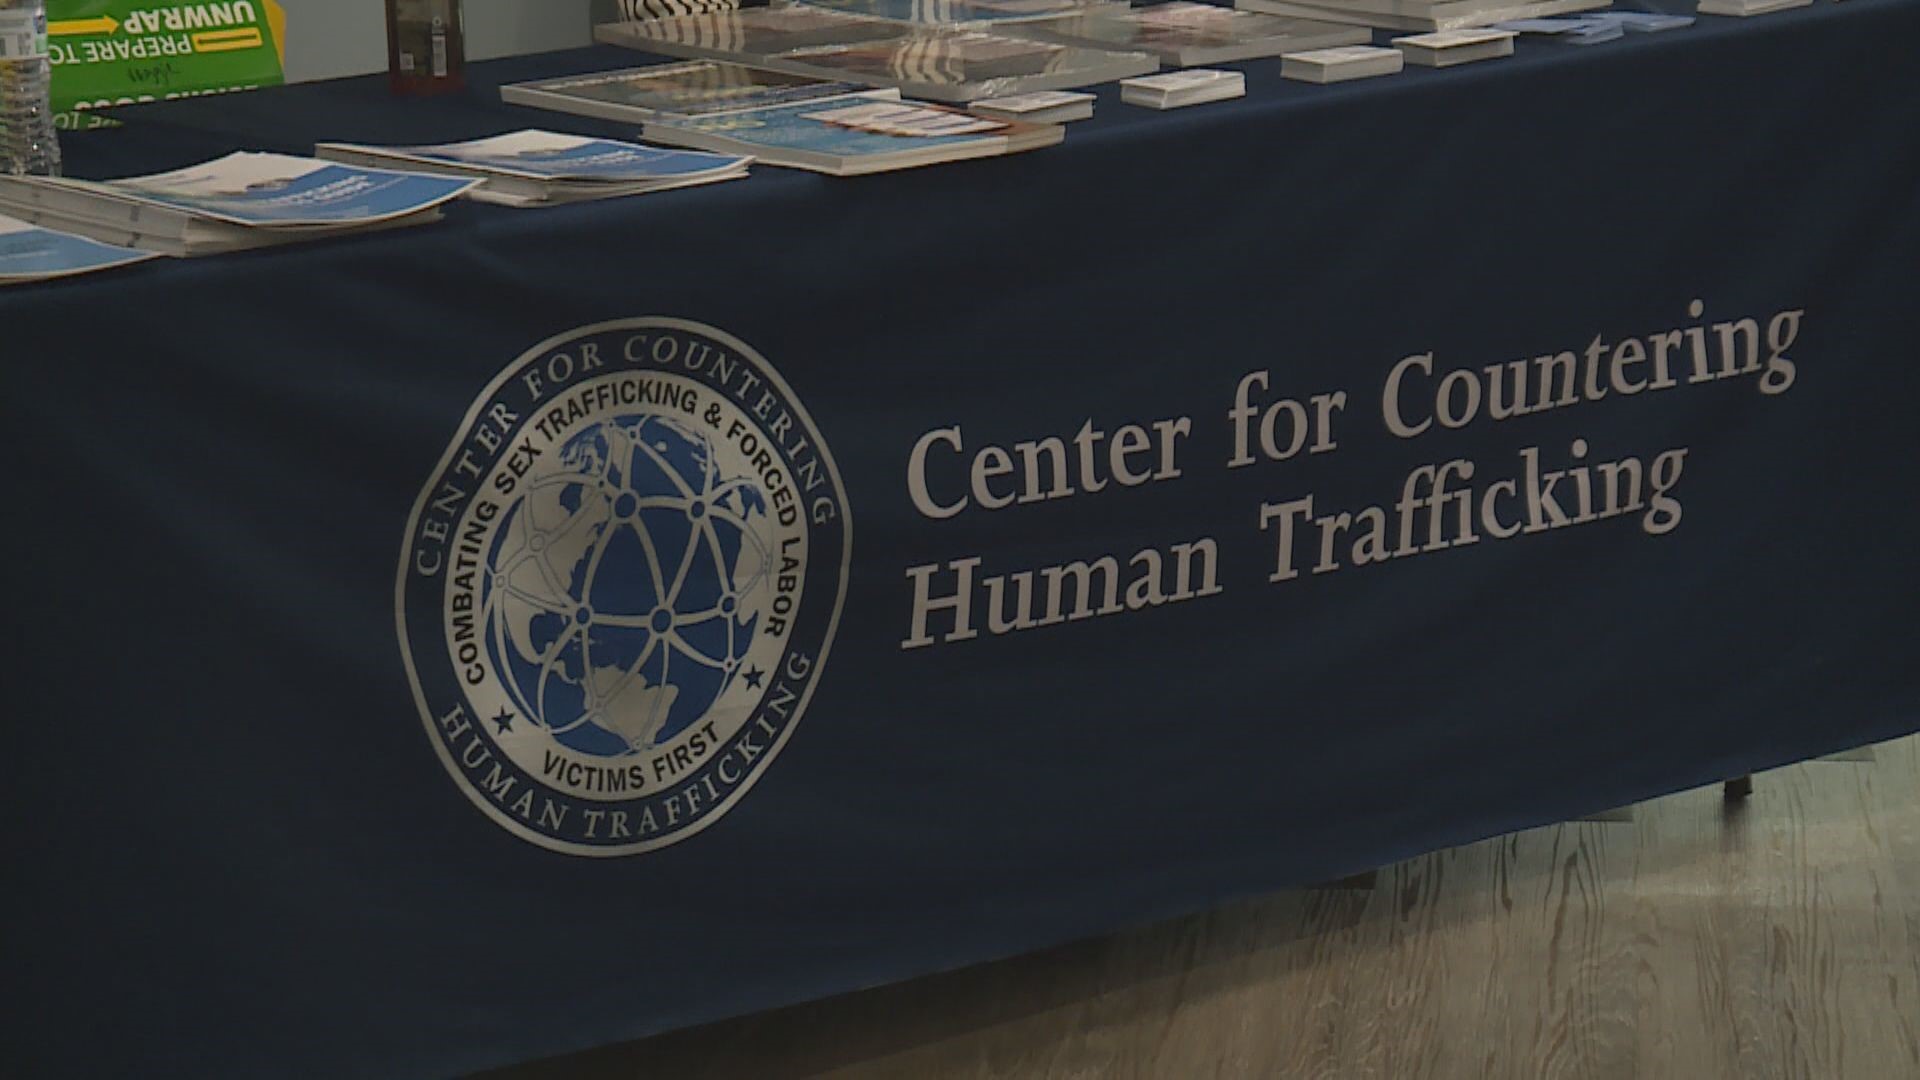 THE UNIVERSITY OF ARKANSAS FORT SMITH HOSTED A HUMAN TRAFFICKING SYMPOSIUM TODAY.